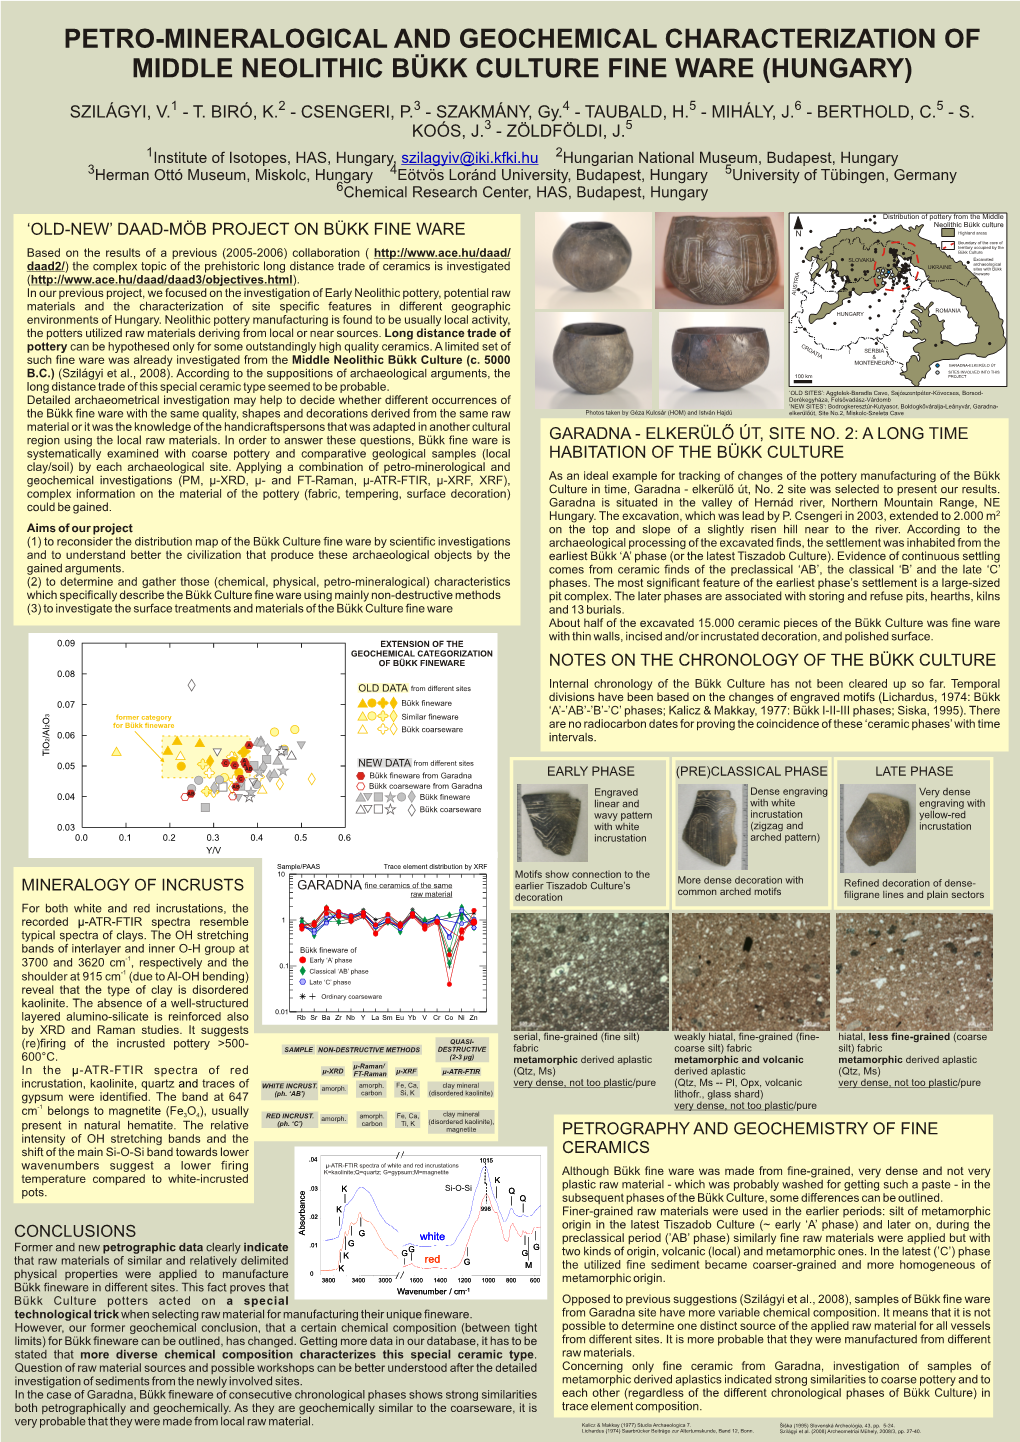 Petro-Mineralogical and Geochemical Characterization of Middle Neolithic Bükk Culture Fine Ware (Hungary)